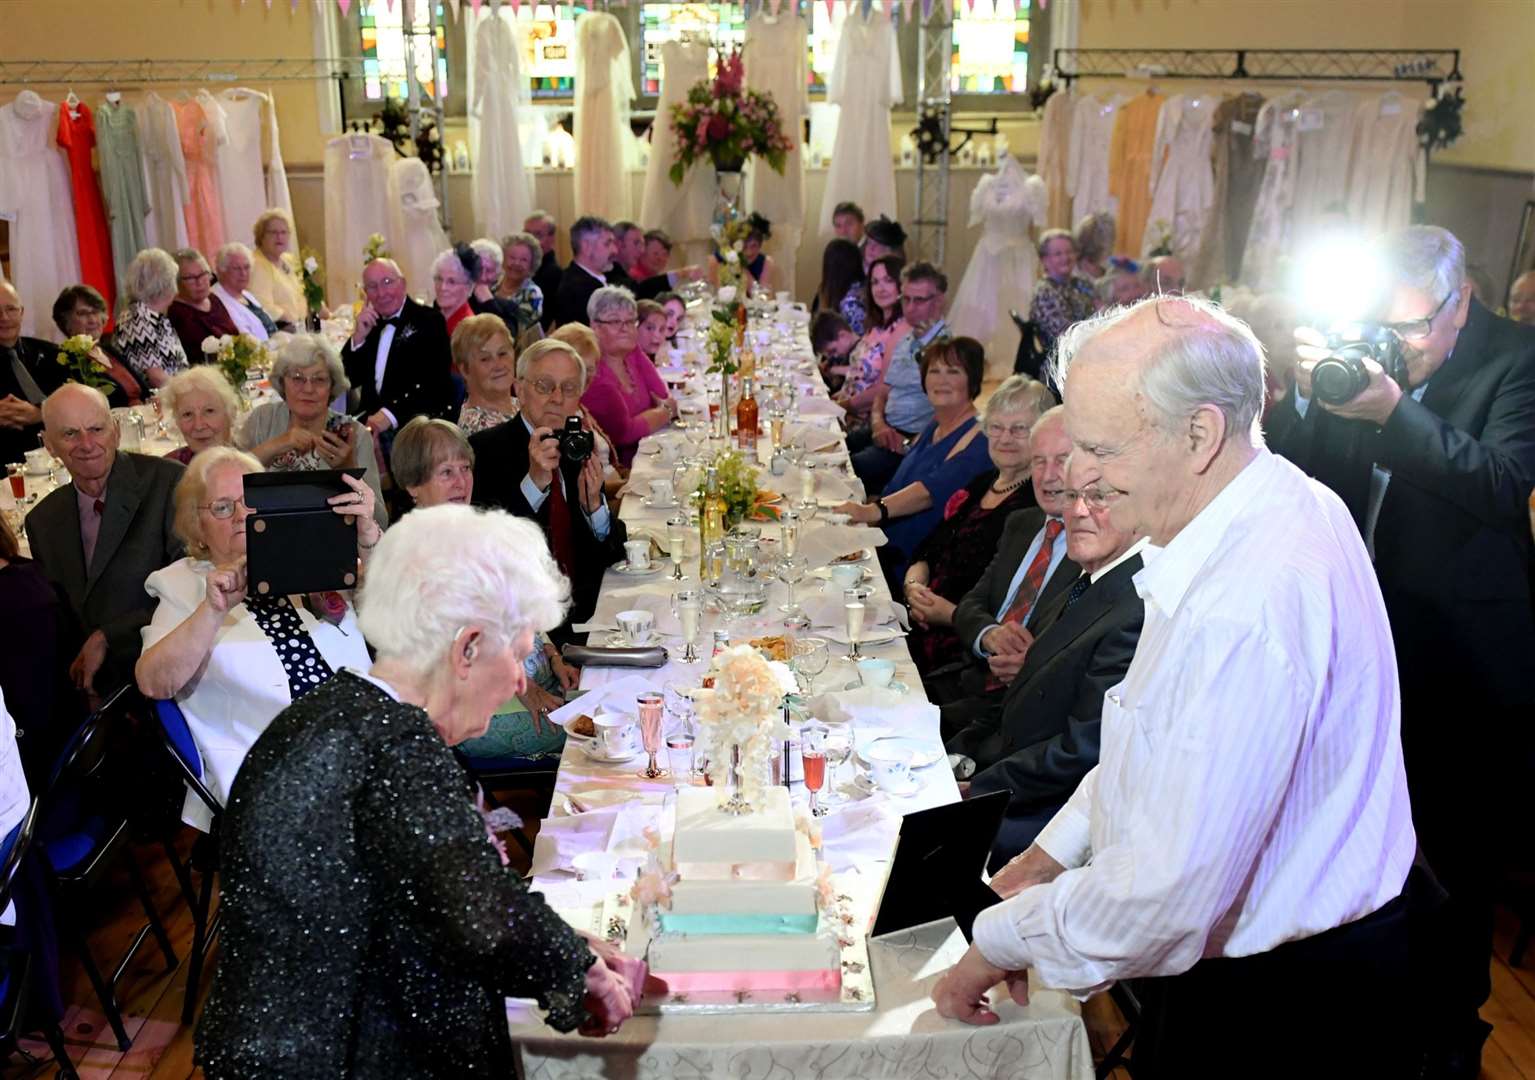 Guests of honour David and Lucy Livingston, who have been married 61 years, cut the cake. Pictures: James Mackenzie.